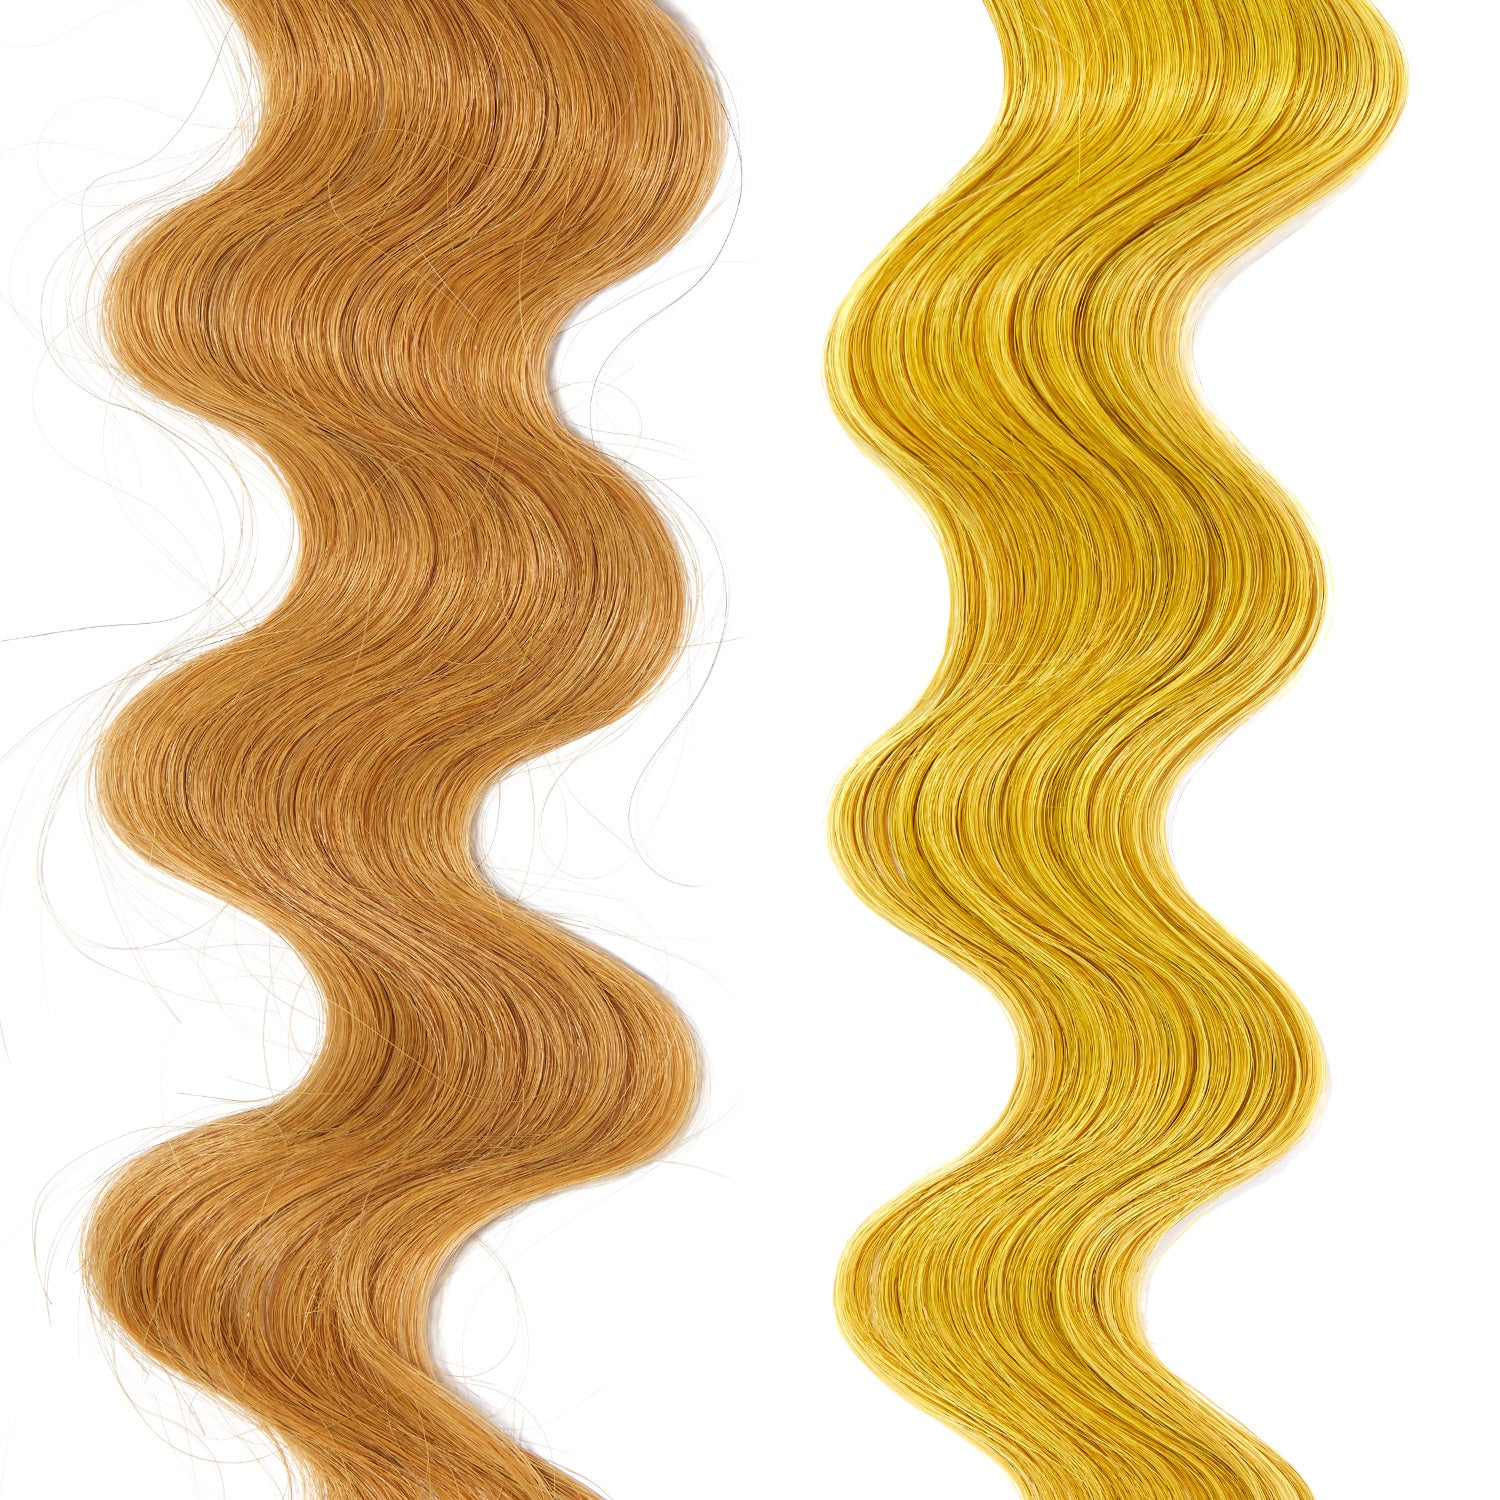 bright yellow hair color on light blonde hair